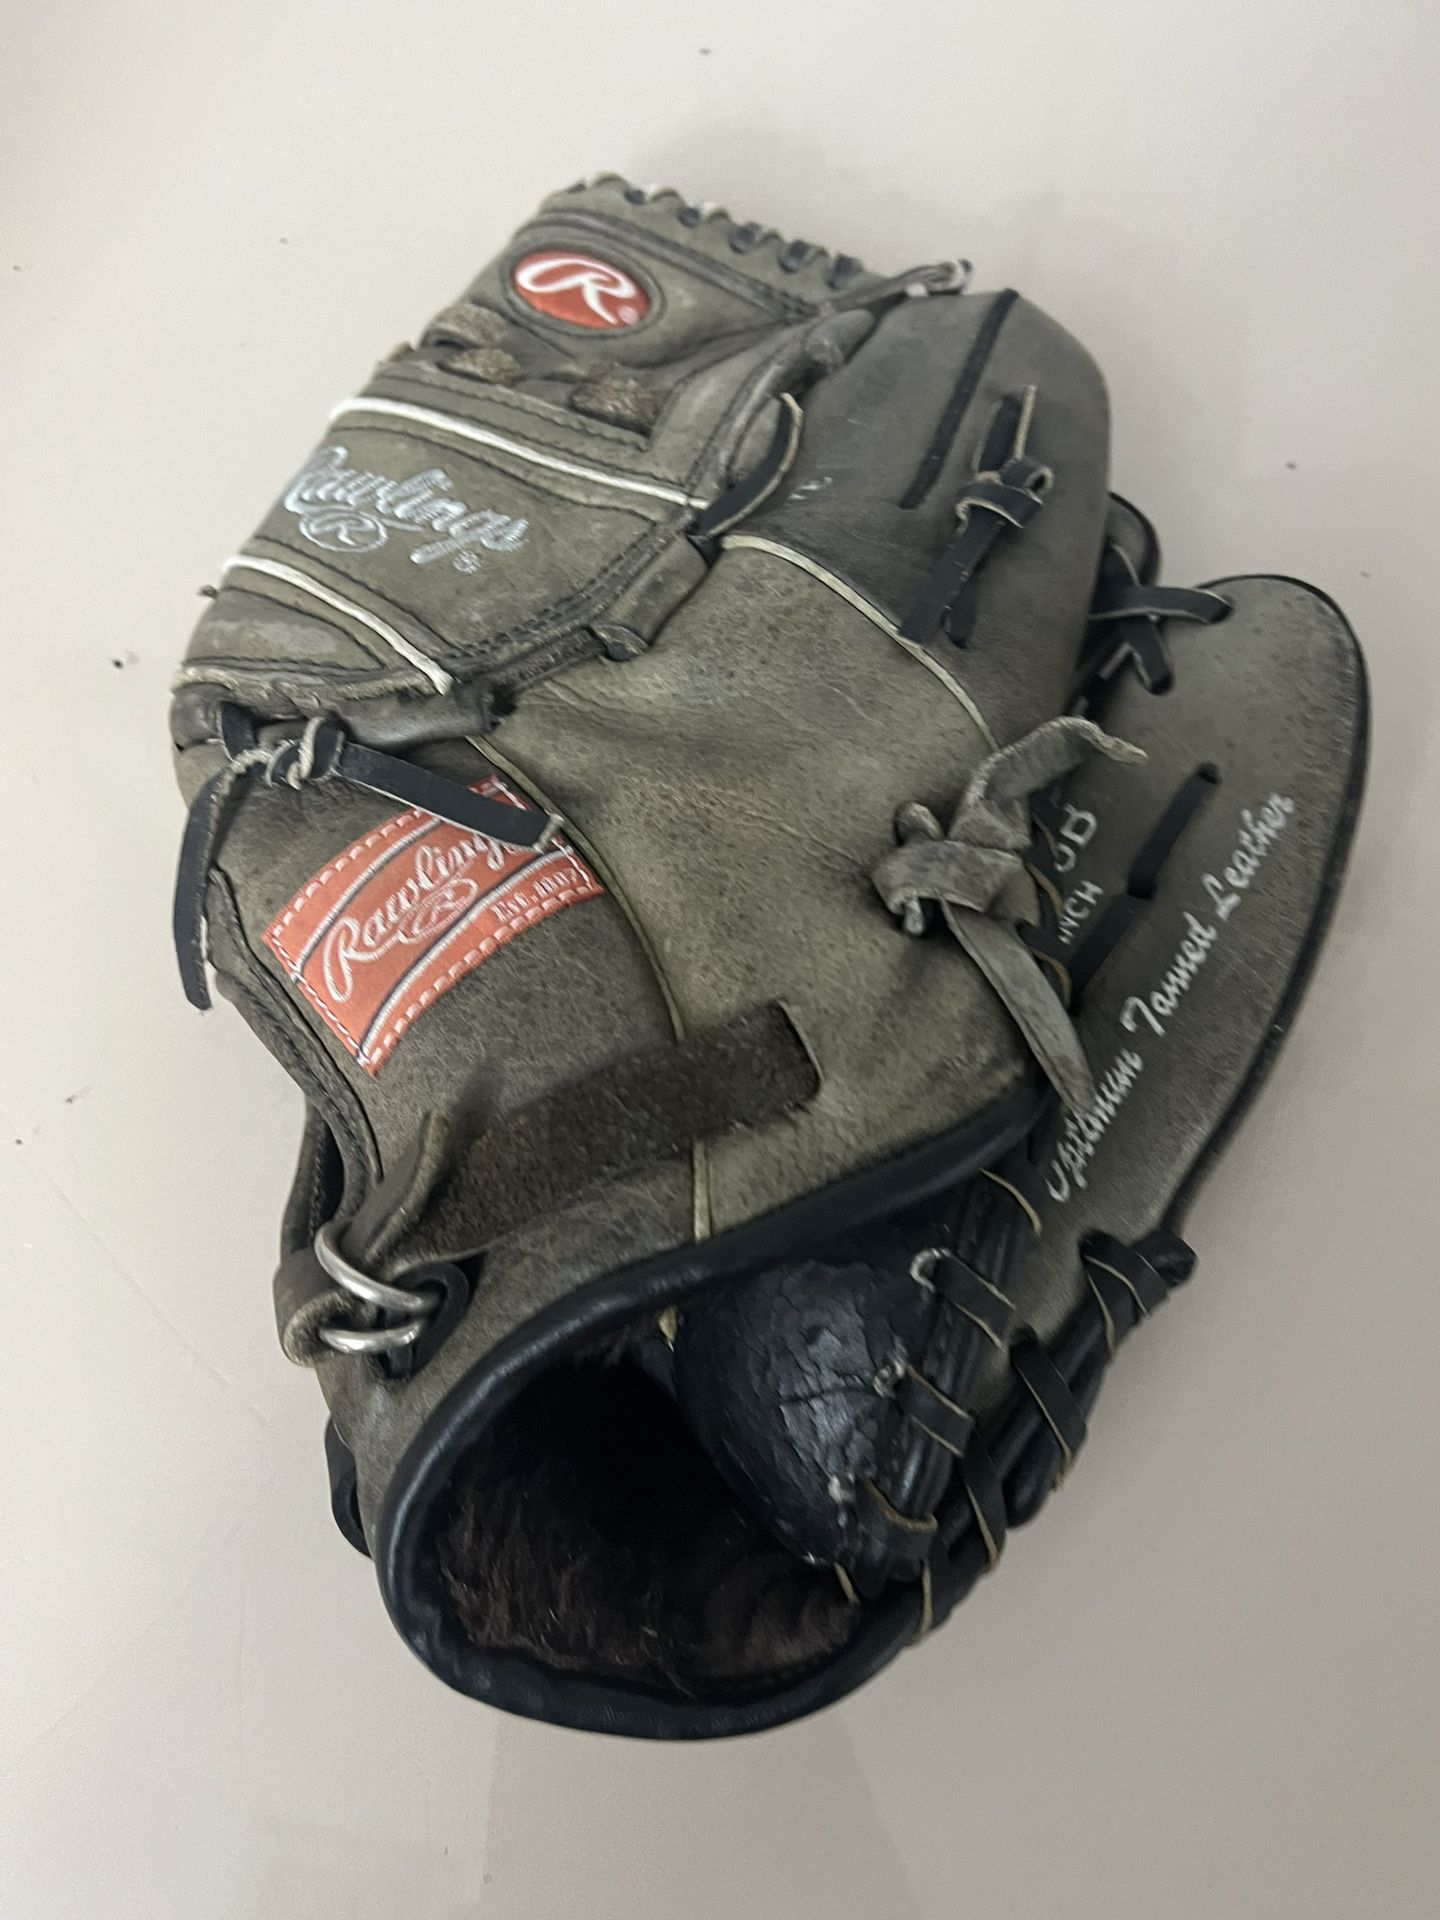 Rawlings  RBG65B 12" Baseball Softball Glove Right Hand Throw  Free Shipping. Pre owned in good condition with normal signs of usage see pics. Still h